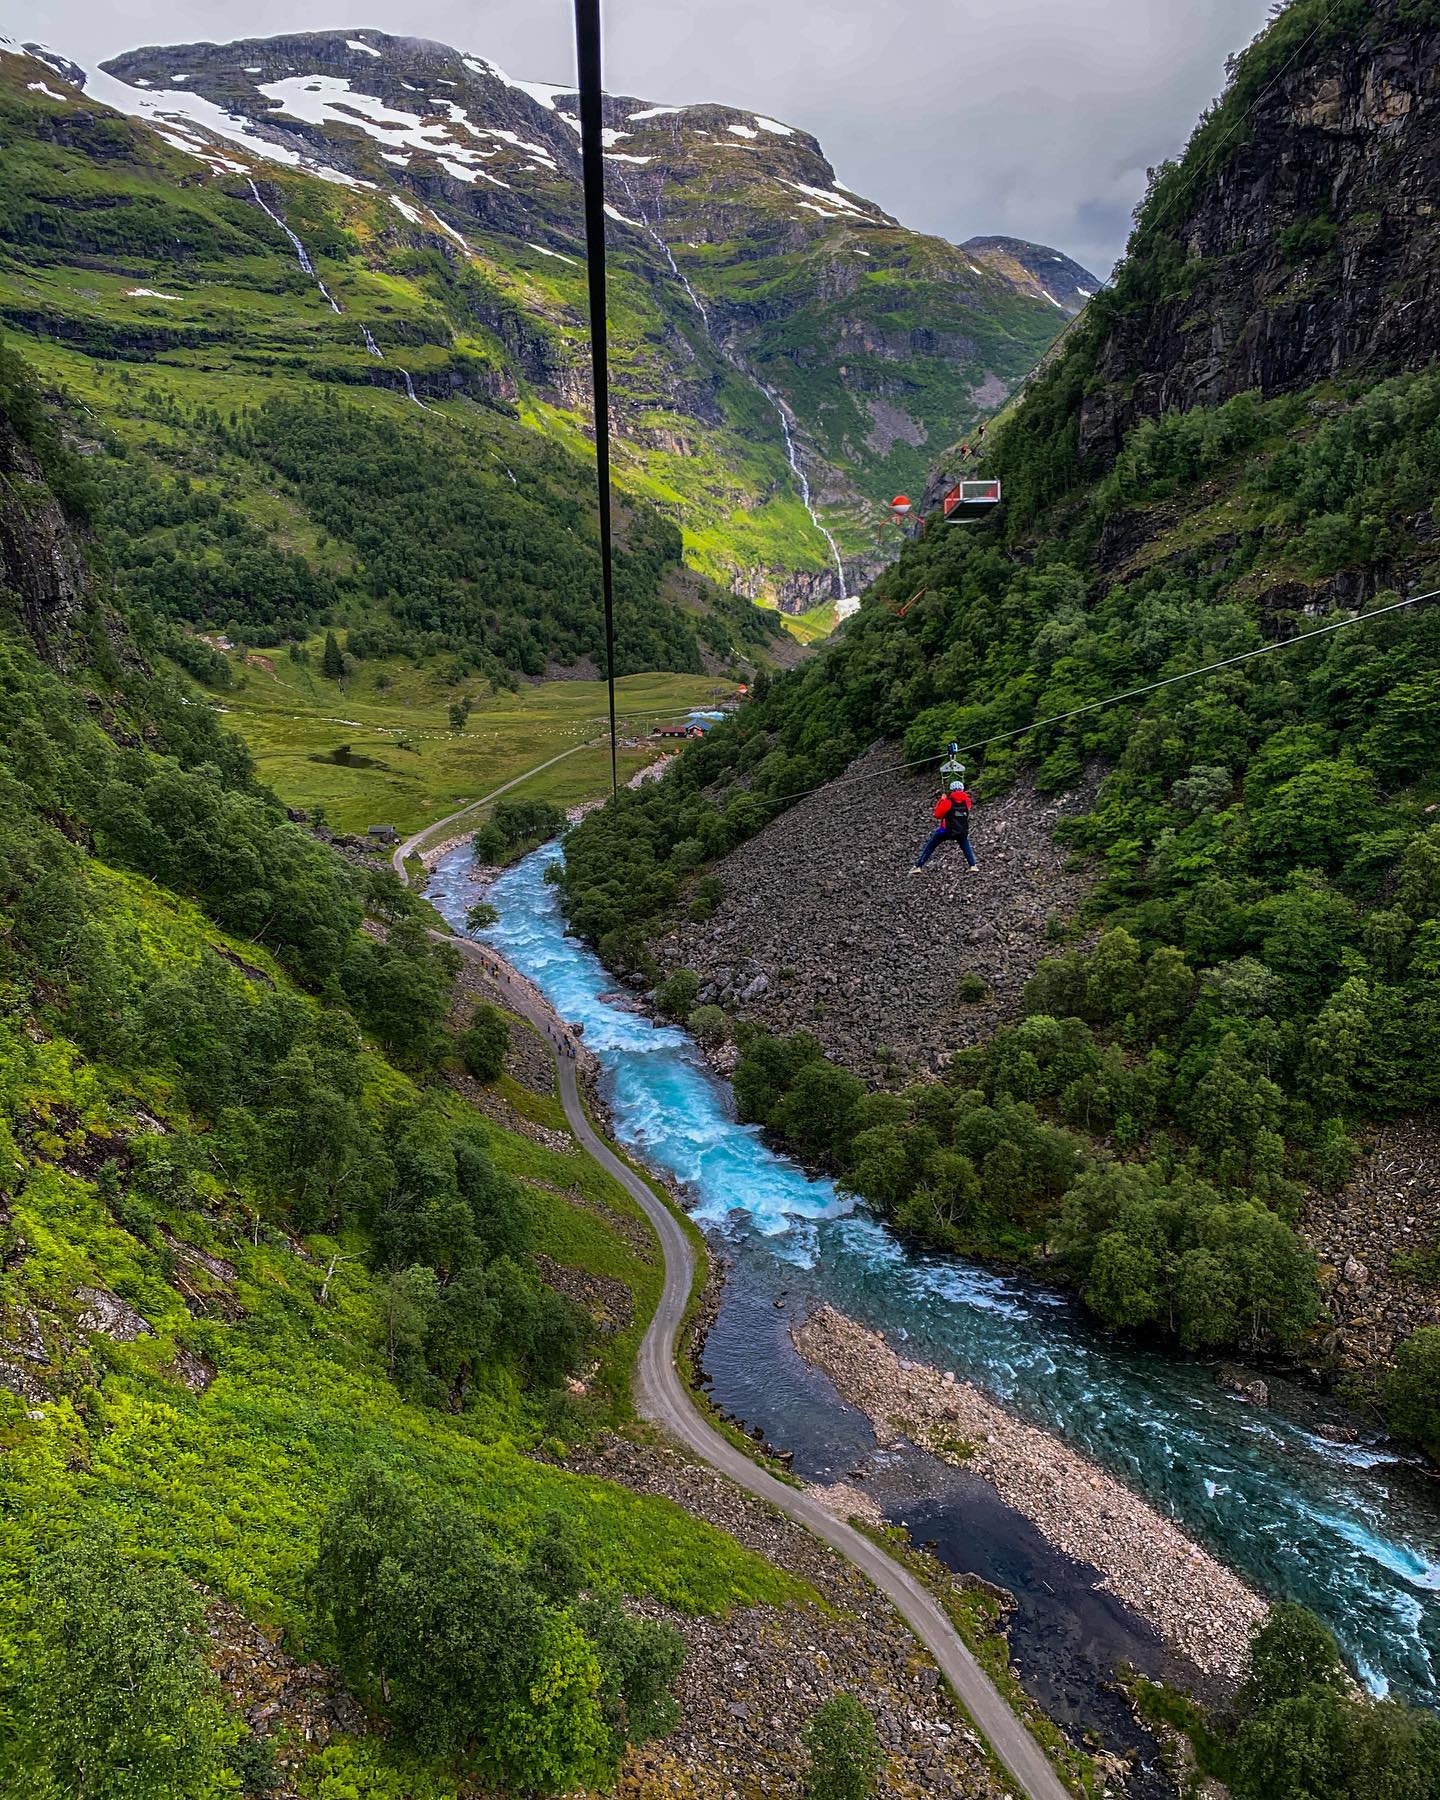 Things to do in Norway - experience breathtaking nature!